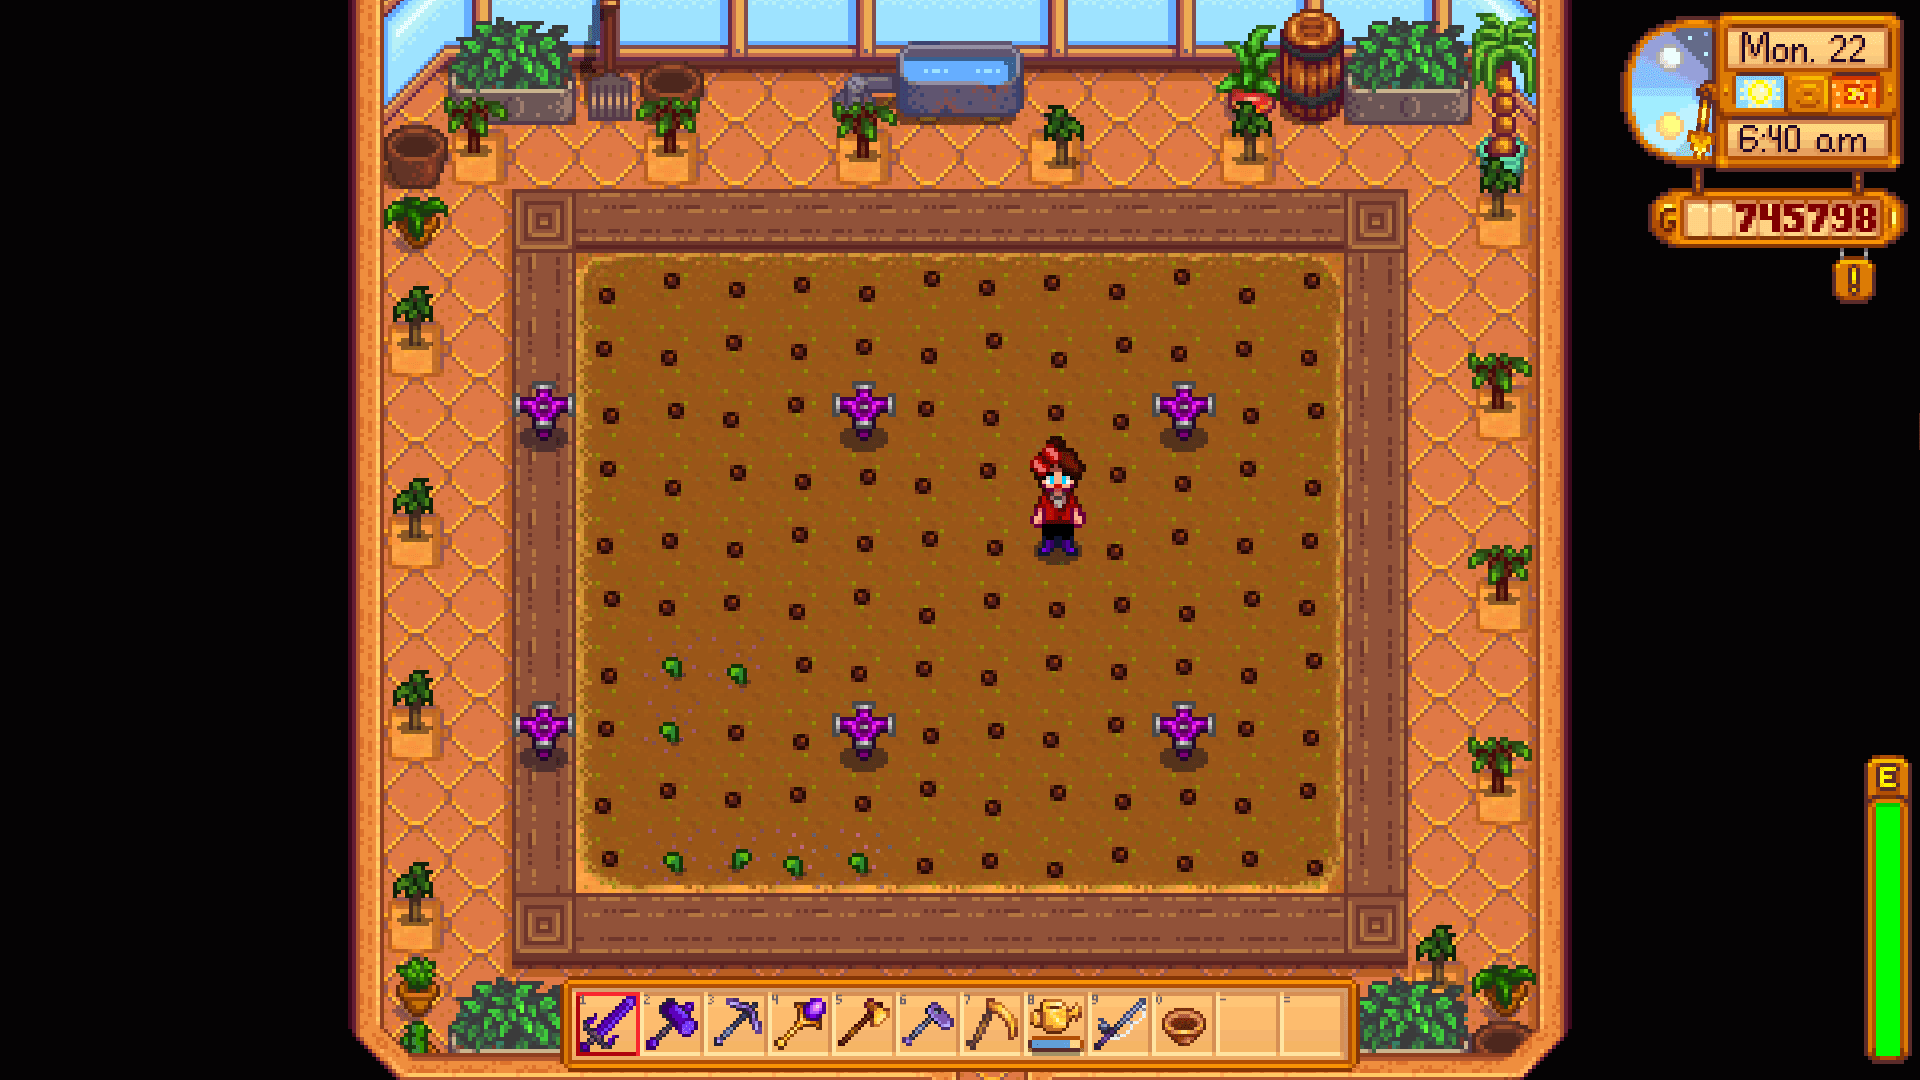 Stardew Valley optimal greenhouse setup with 18 saplngs, six Iridium sprinklers, and 116 Anient Seeds, some of which have sprouted.